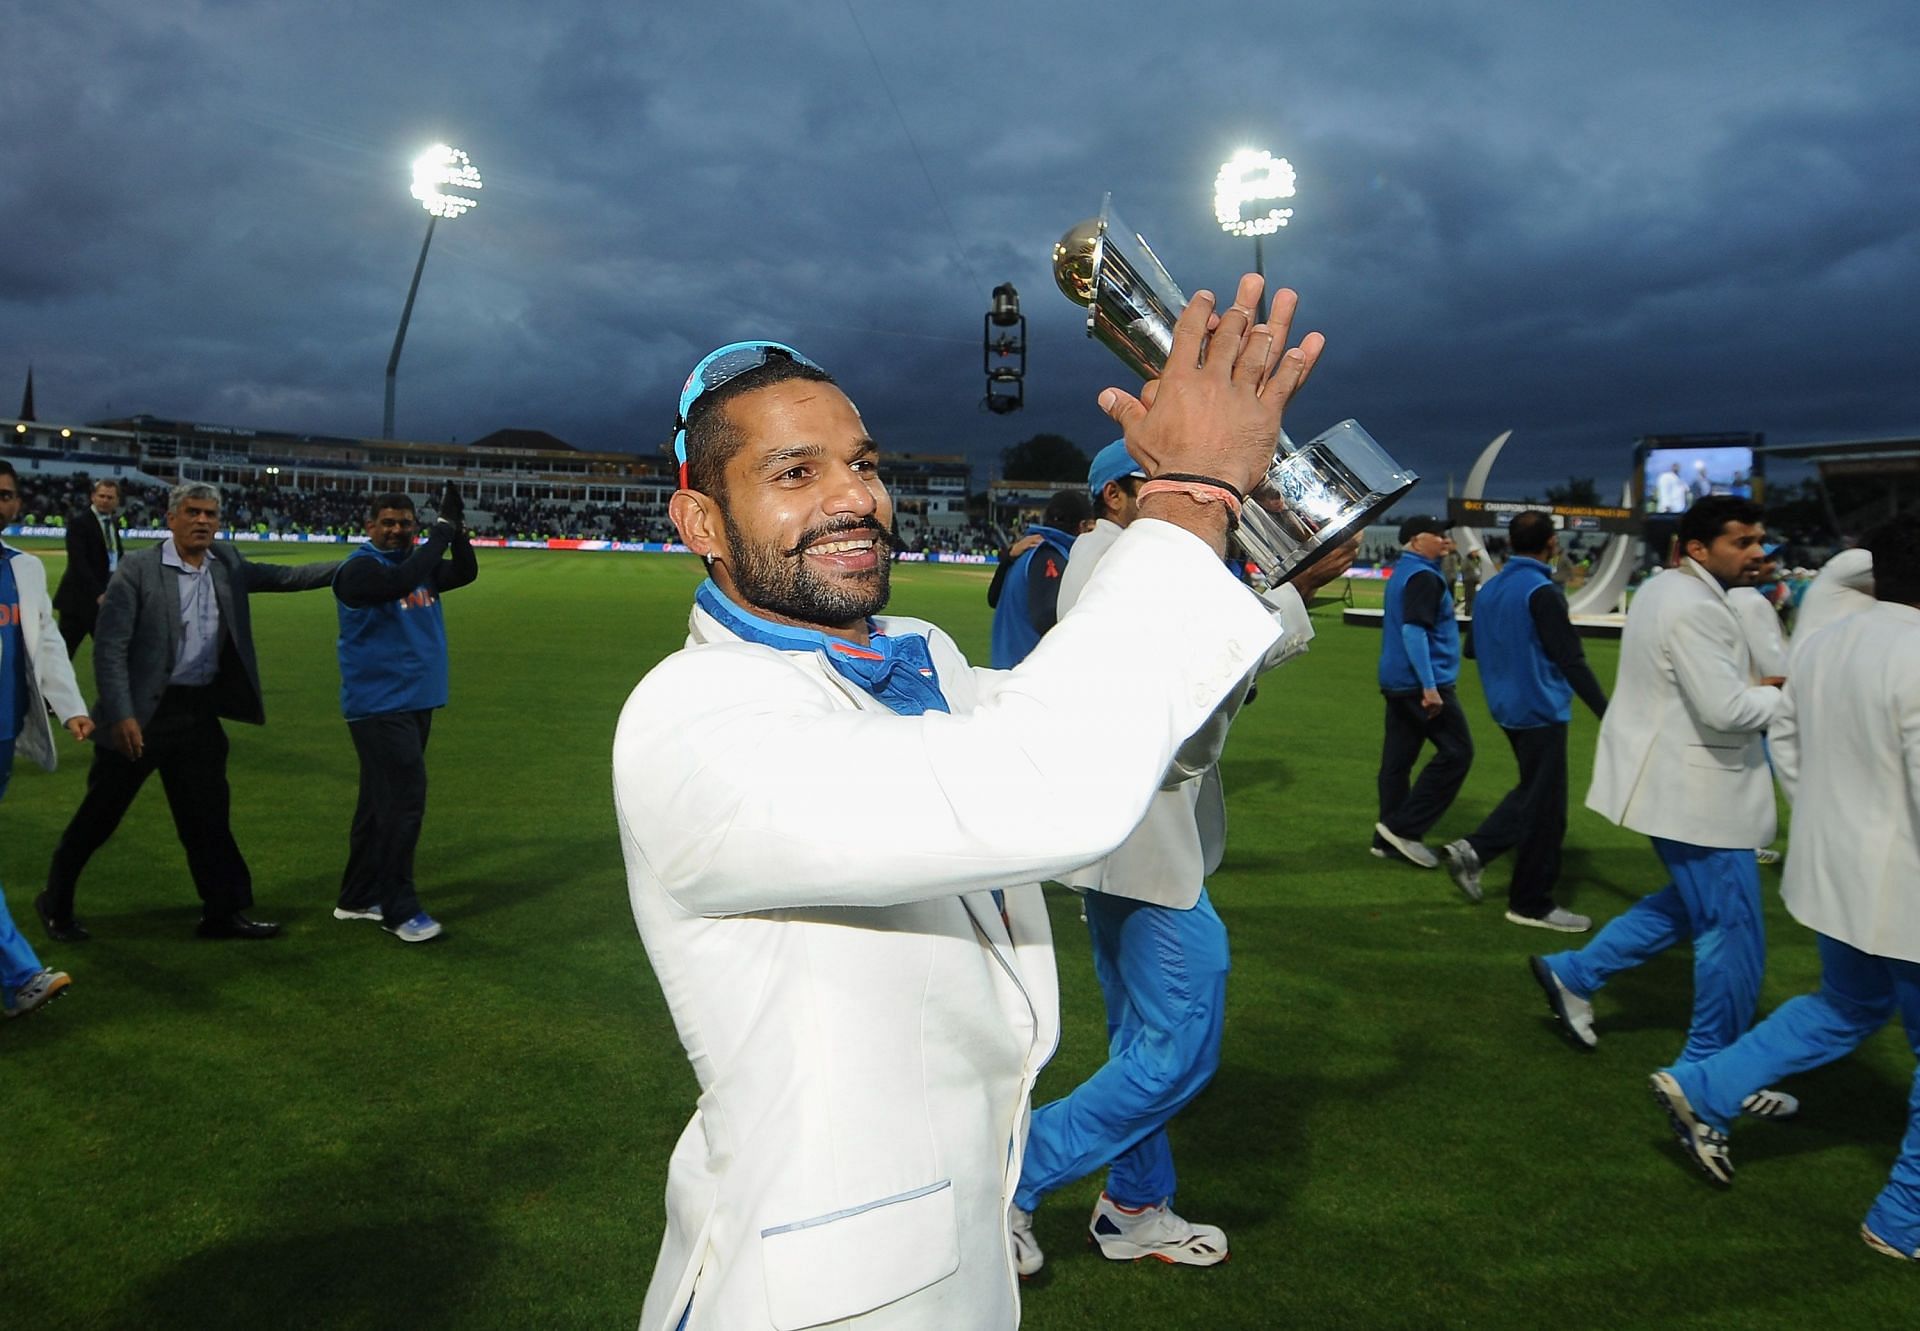 The Cricket fraternity extends warm wishes to Shikhar Dhawan on his